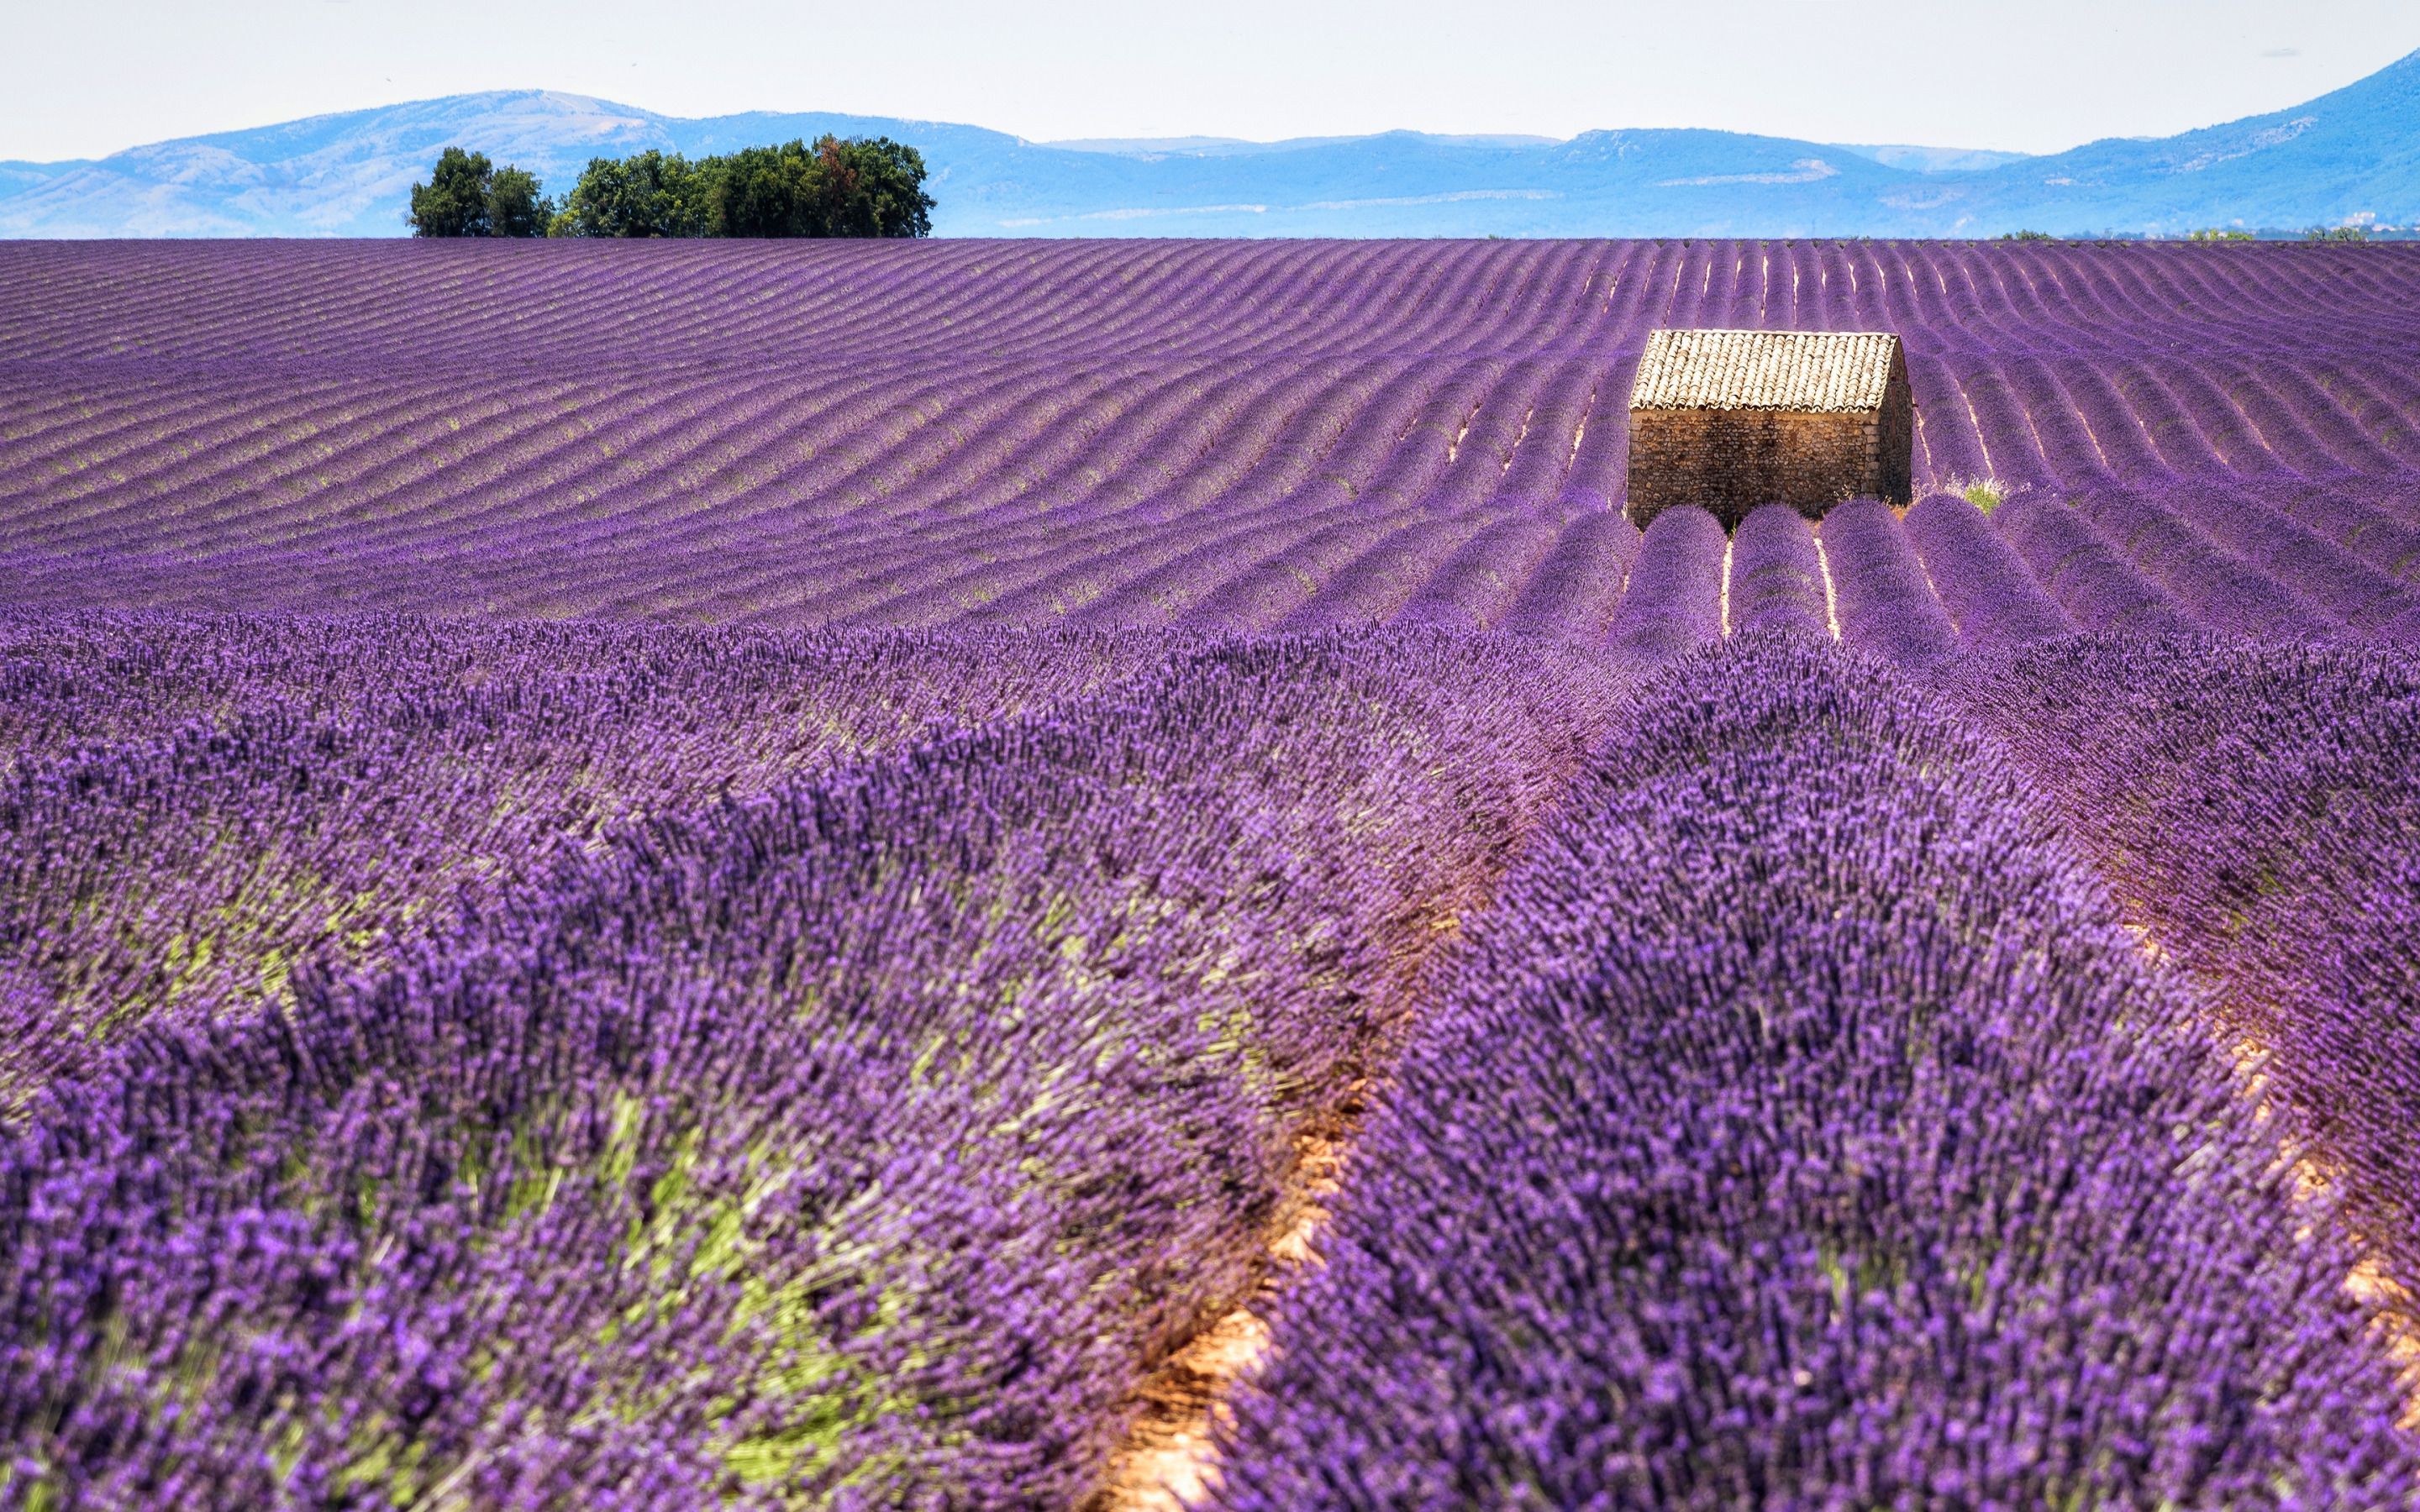 Download wallpaper lavender field, morning, lavender, flower fields, purple flowers, Provence, France for desktop with resolution 2880x1800. High Quality HD picture wallpaper